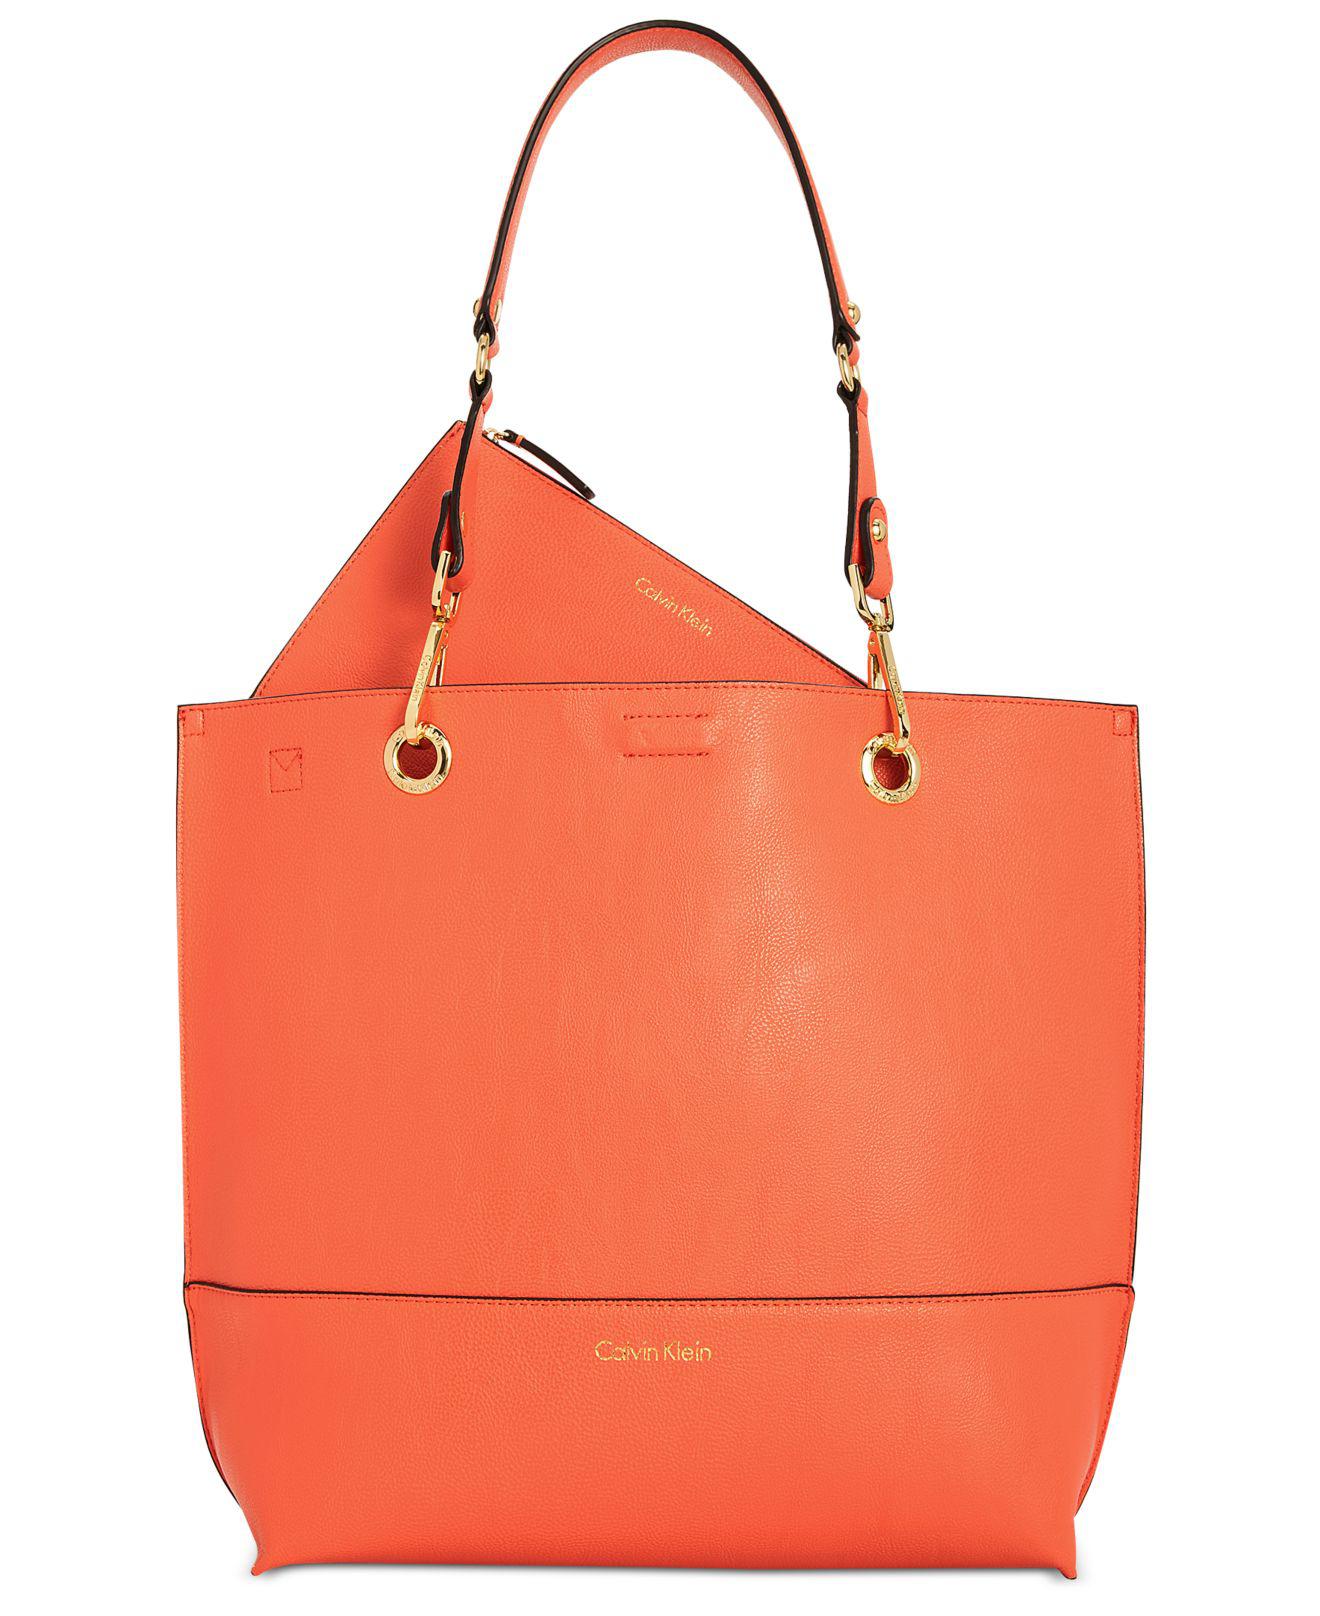 Calvin Klein Sonoma Reversible Novelty Tote With Pouch in Orange | Lyst